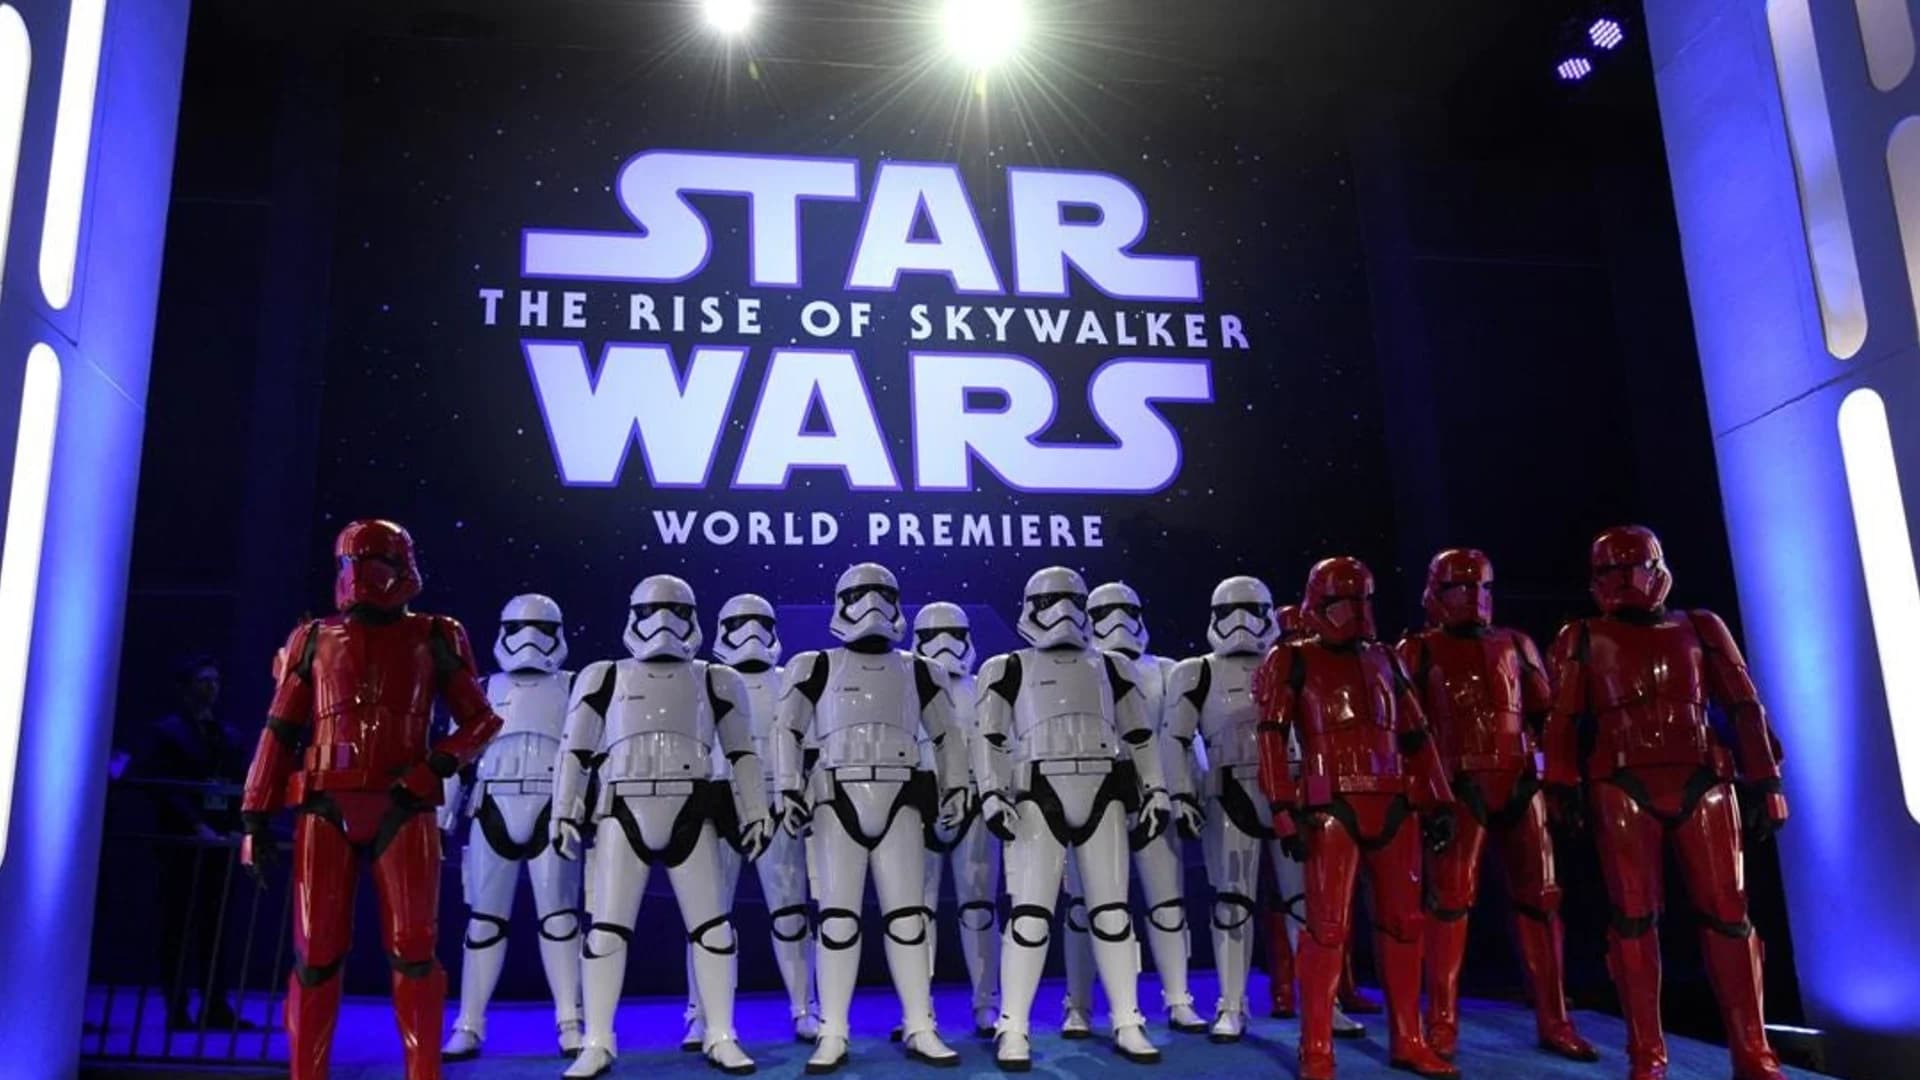 Tributes, standing ovation at 'Rise of Skywalker' premiere